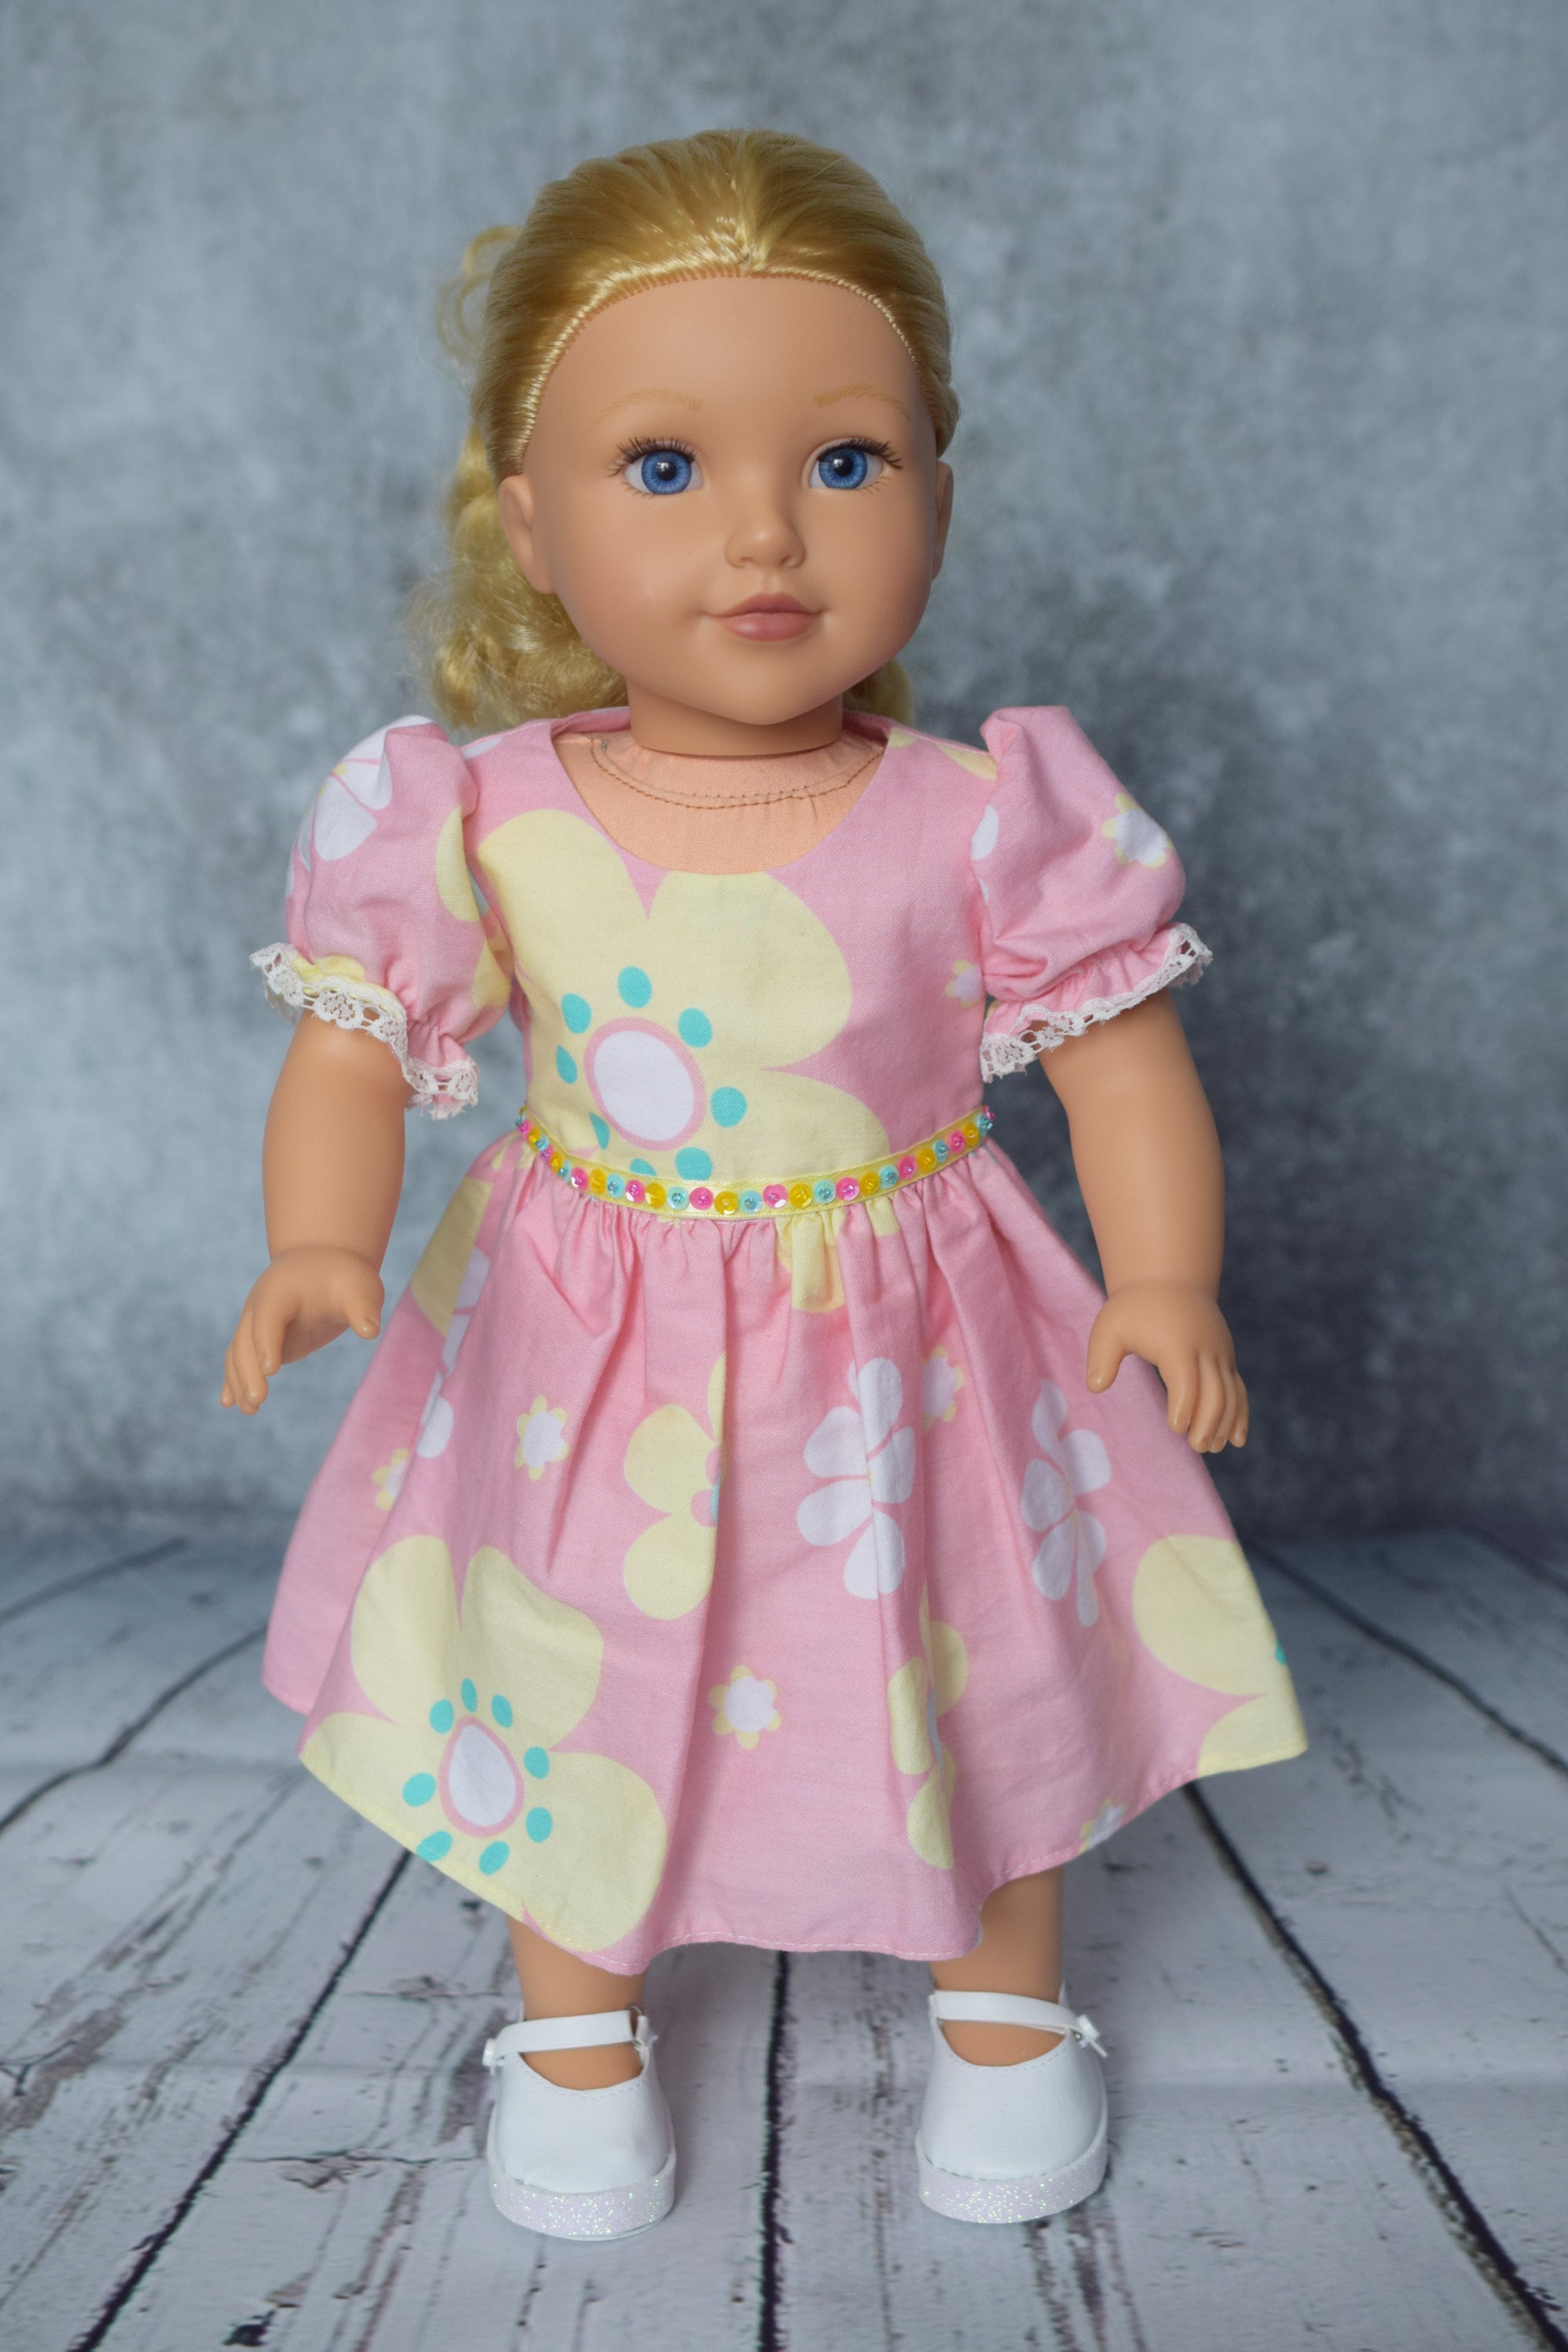 American Girl Doll Clothes - Doll Dress - Girl Gift - Coral Floral ...